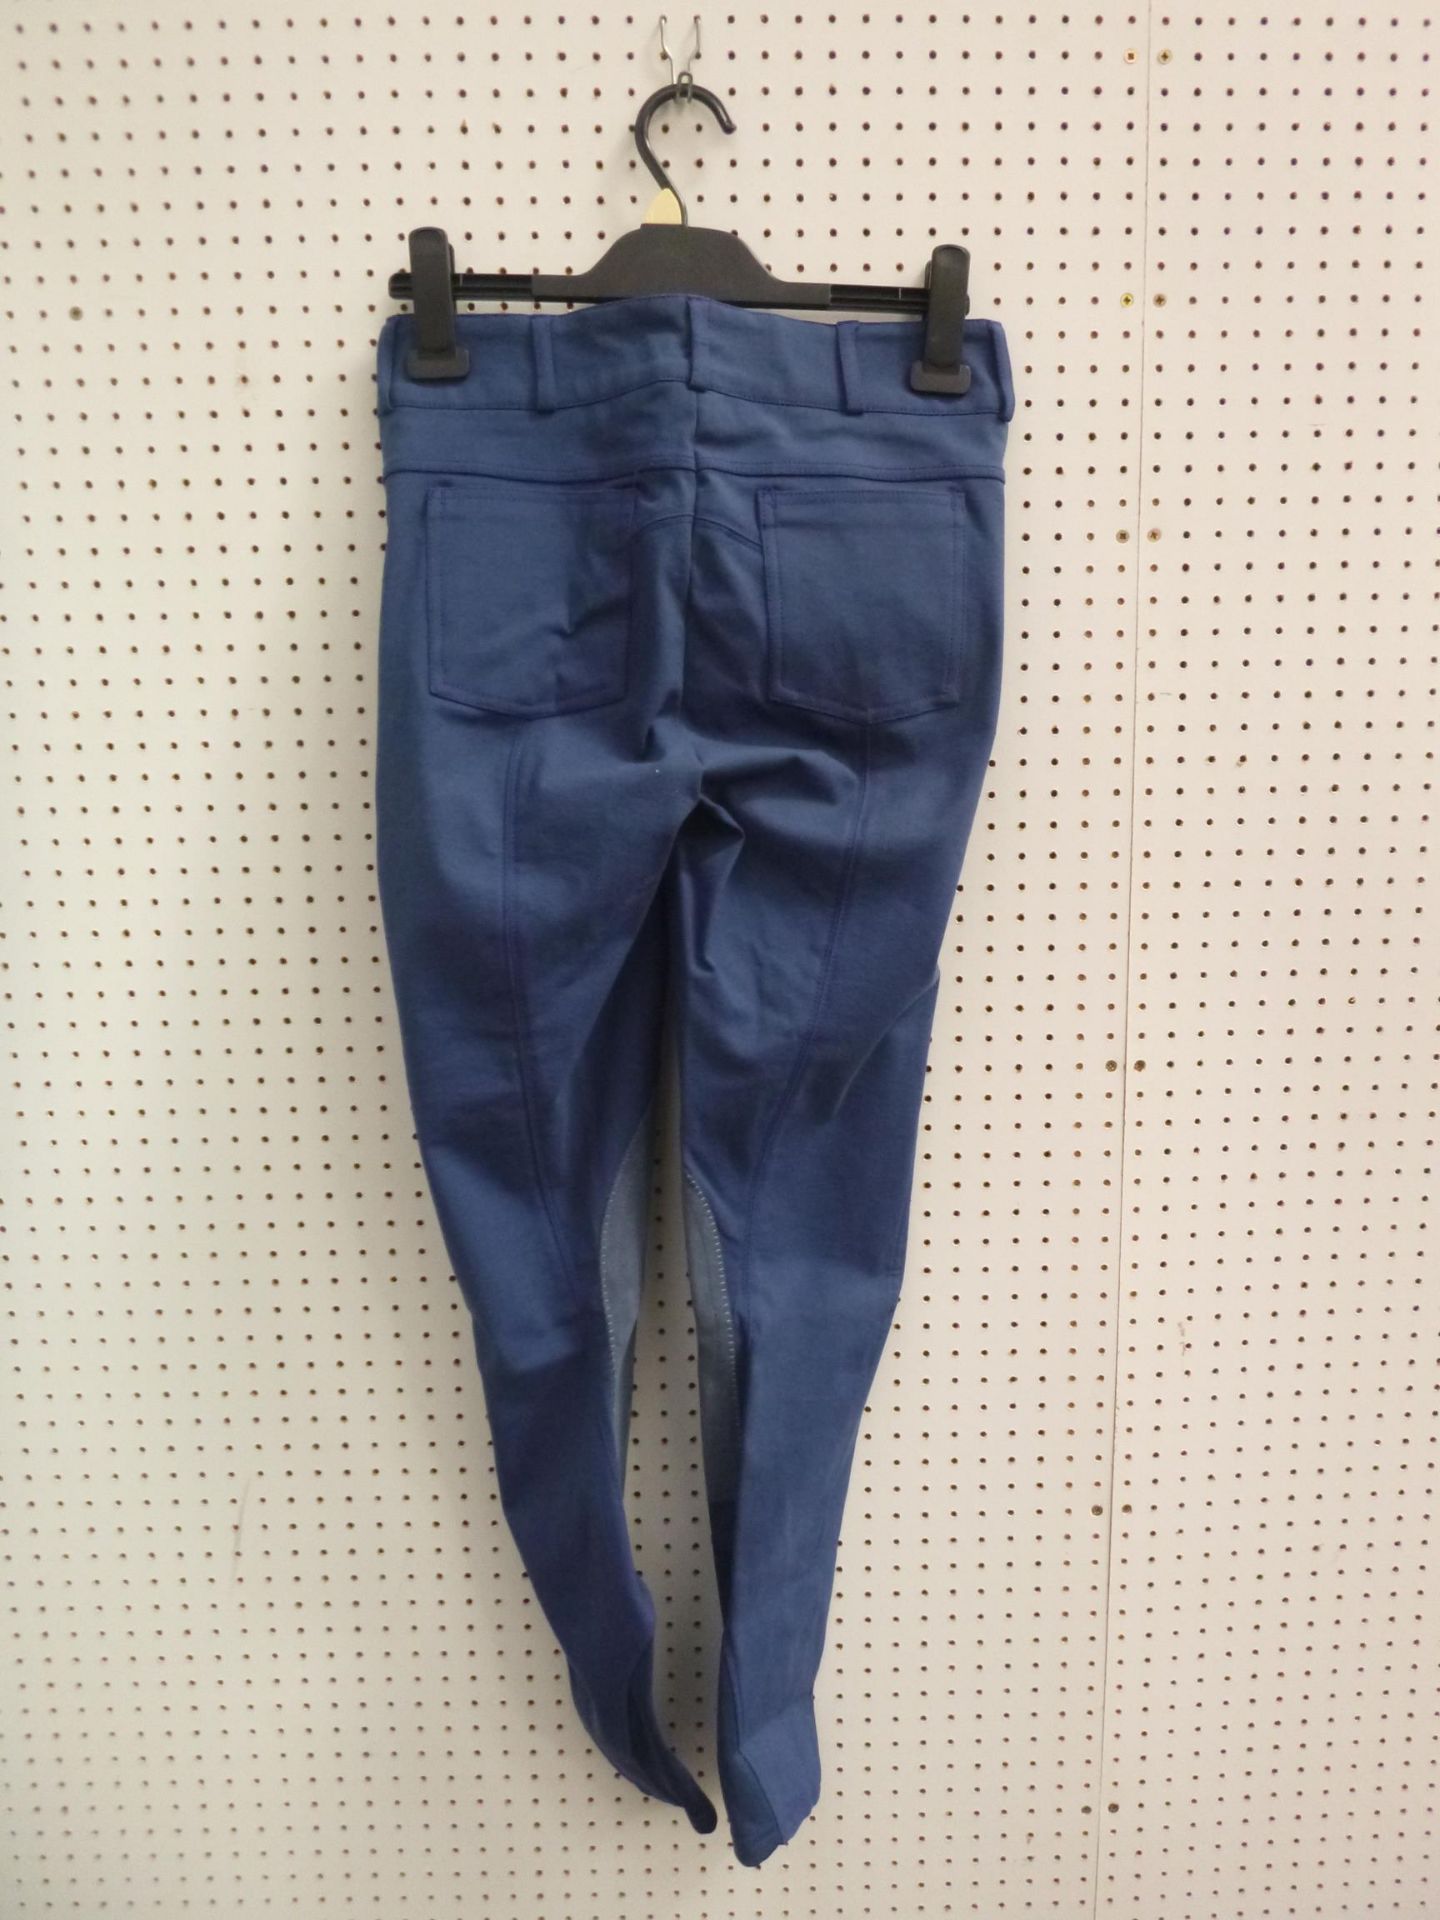 * Four Pairs of New Shires Ladies Winchester Breeches in Steel Blue. One each of size 24,32,34 and - Image 2 of 2